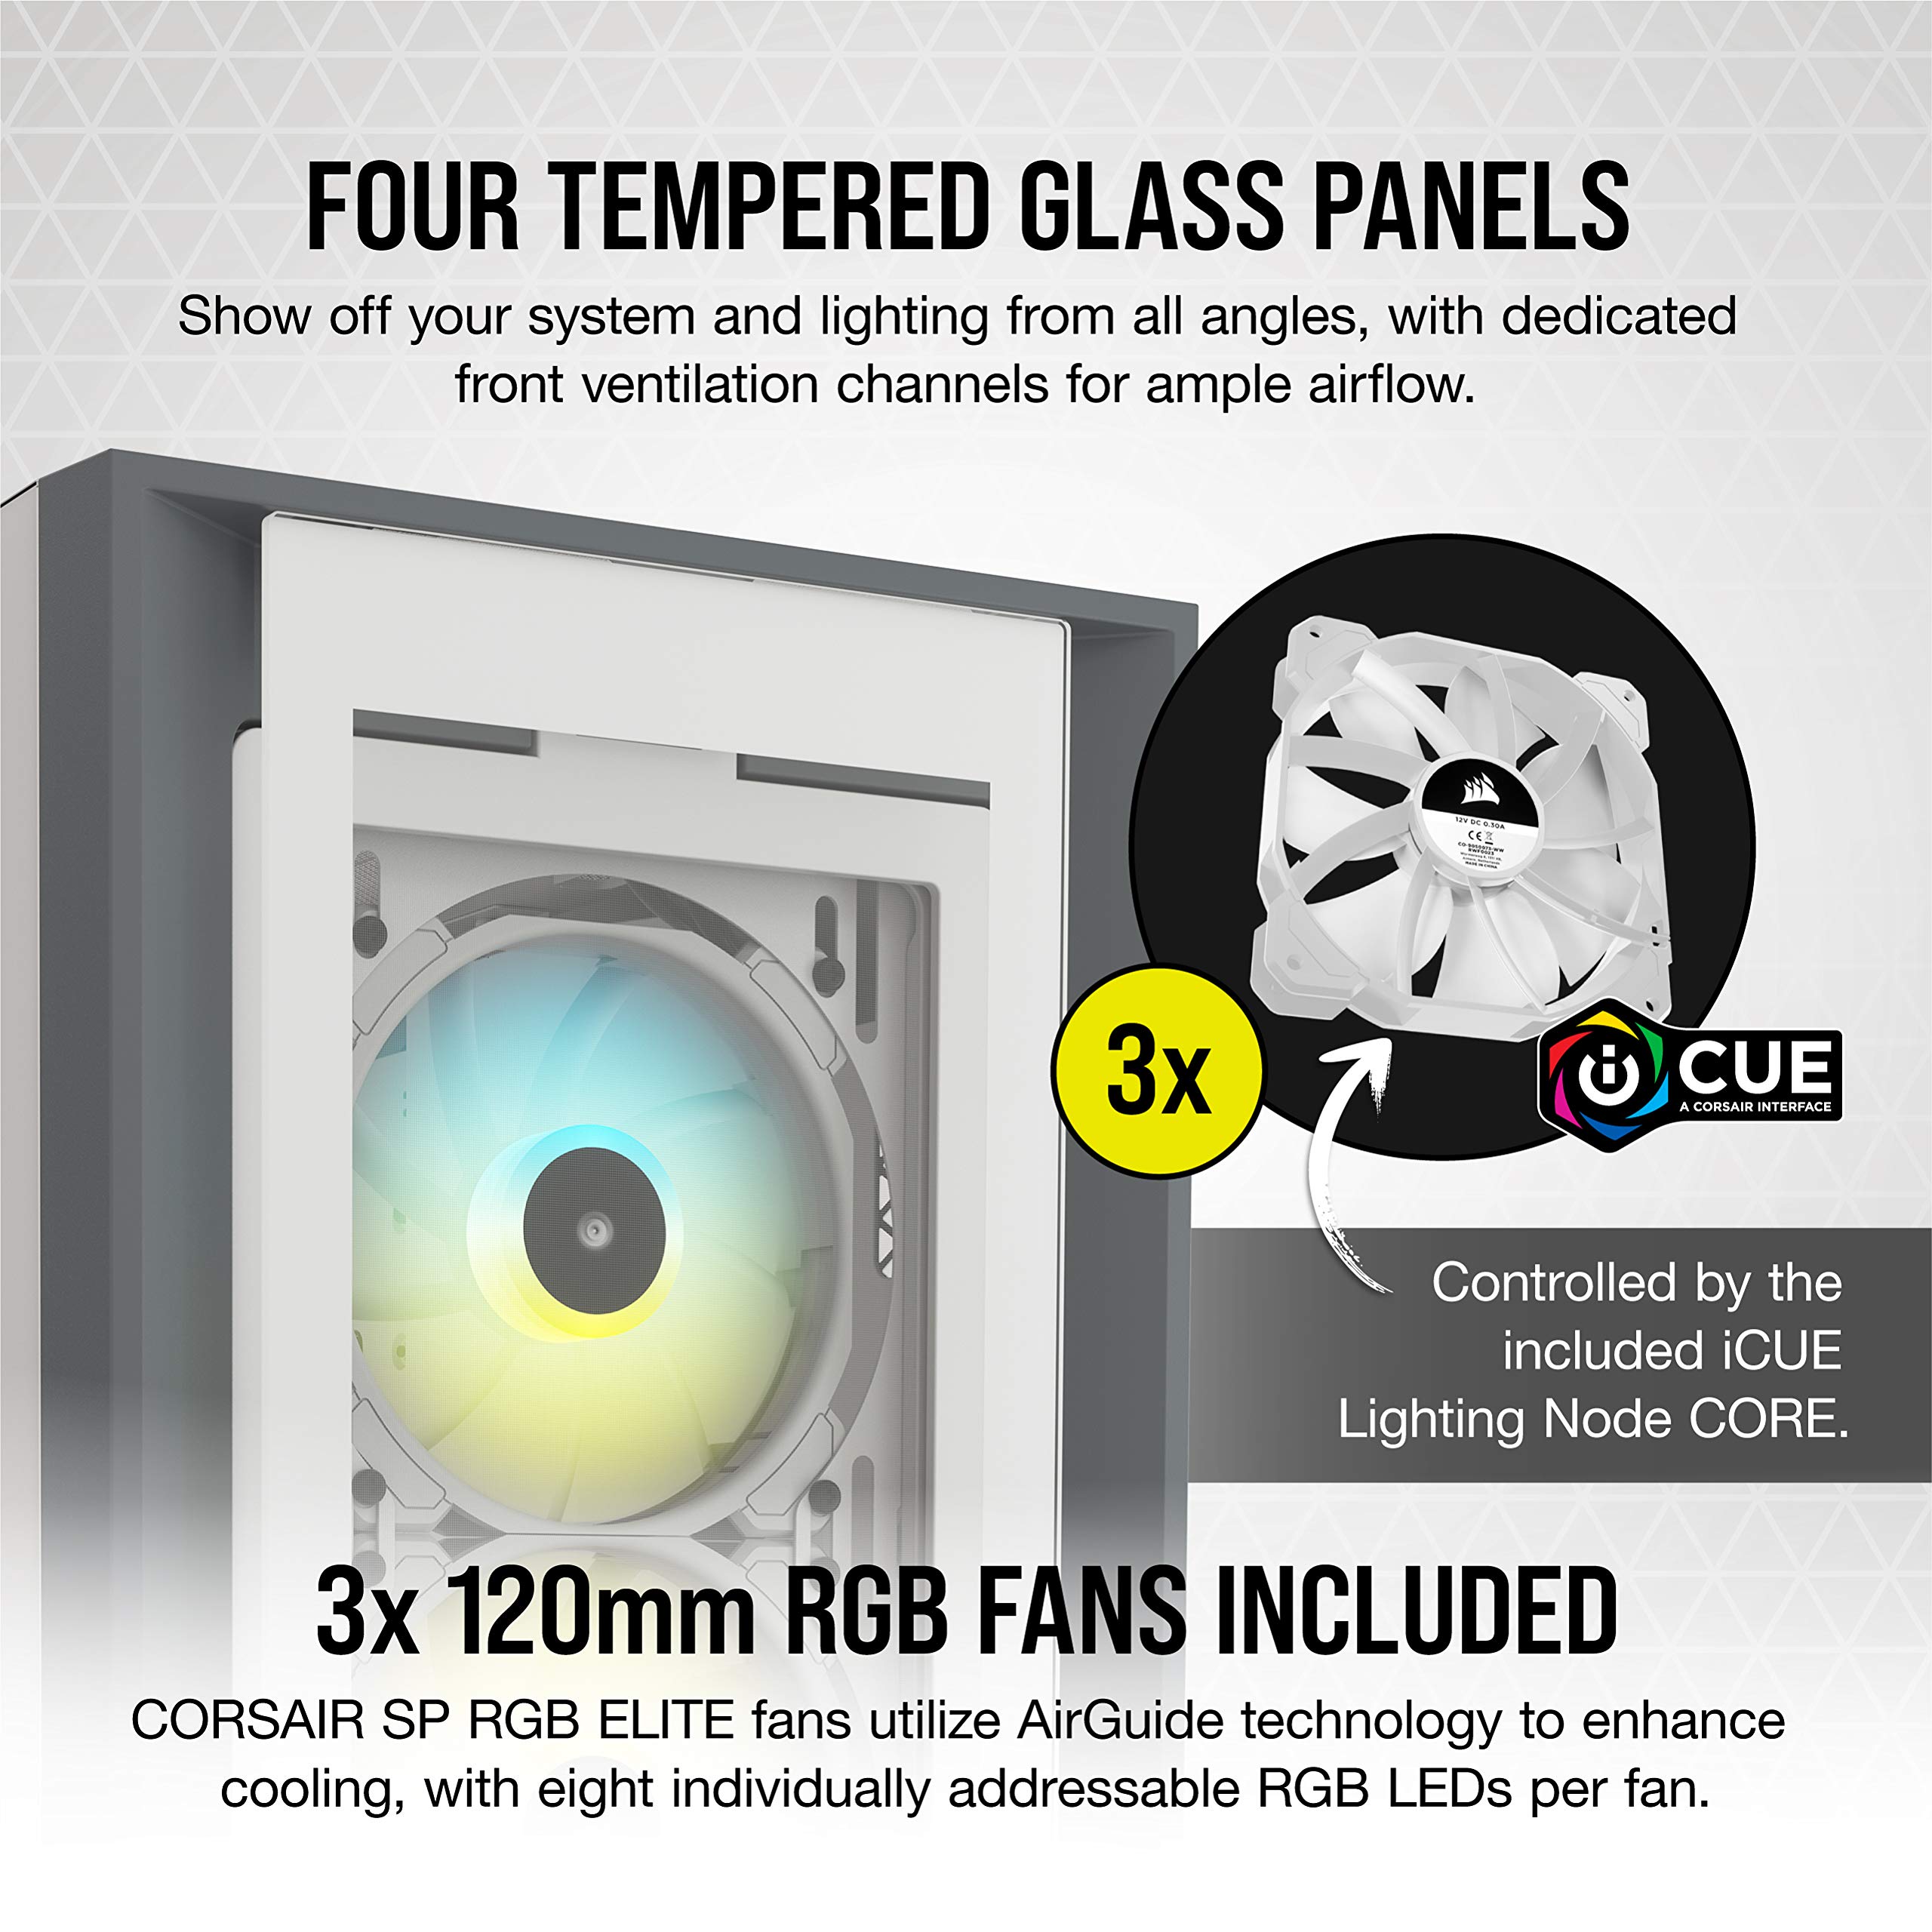 Corsair iCUE 5000X RGB Tempered Glass Mid-Tower ATX PC Smart Case - White